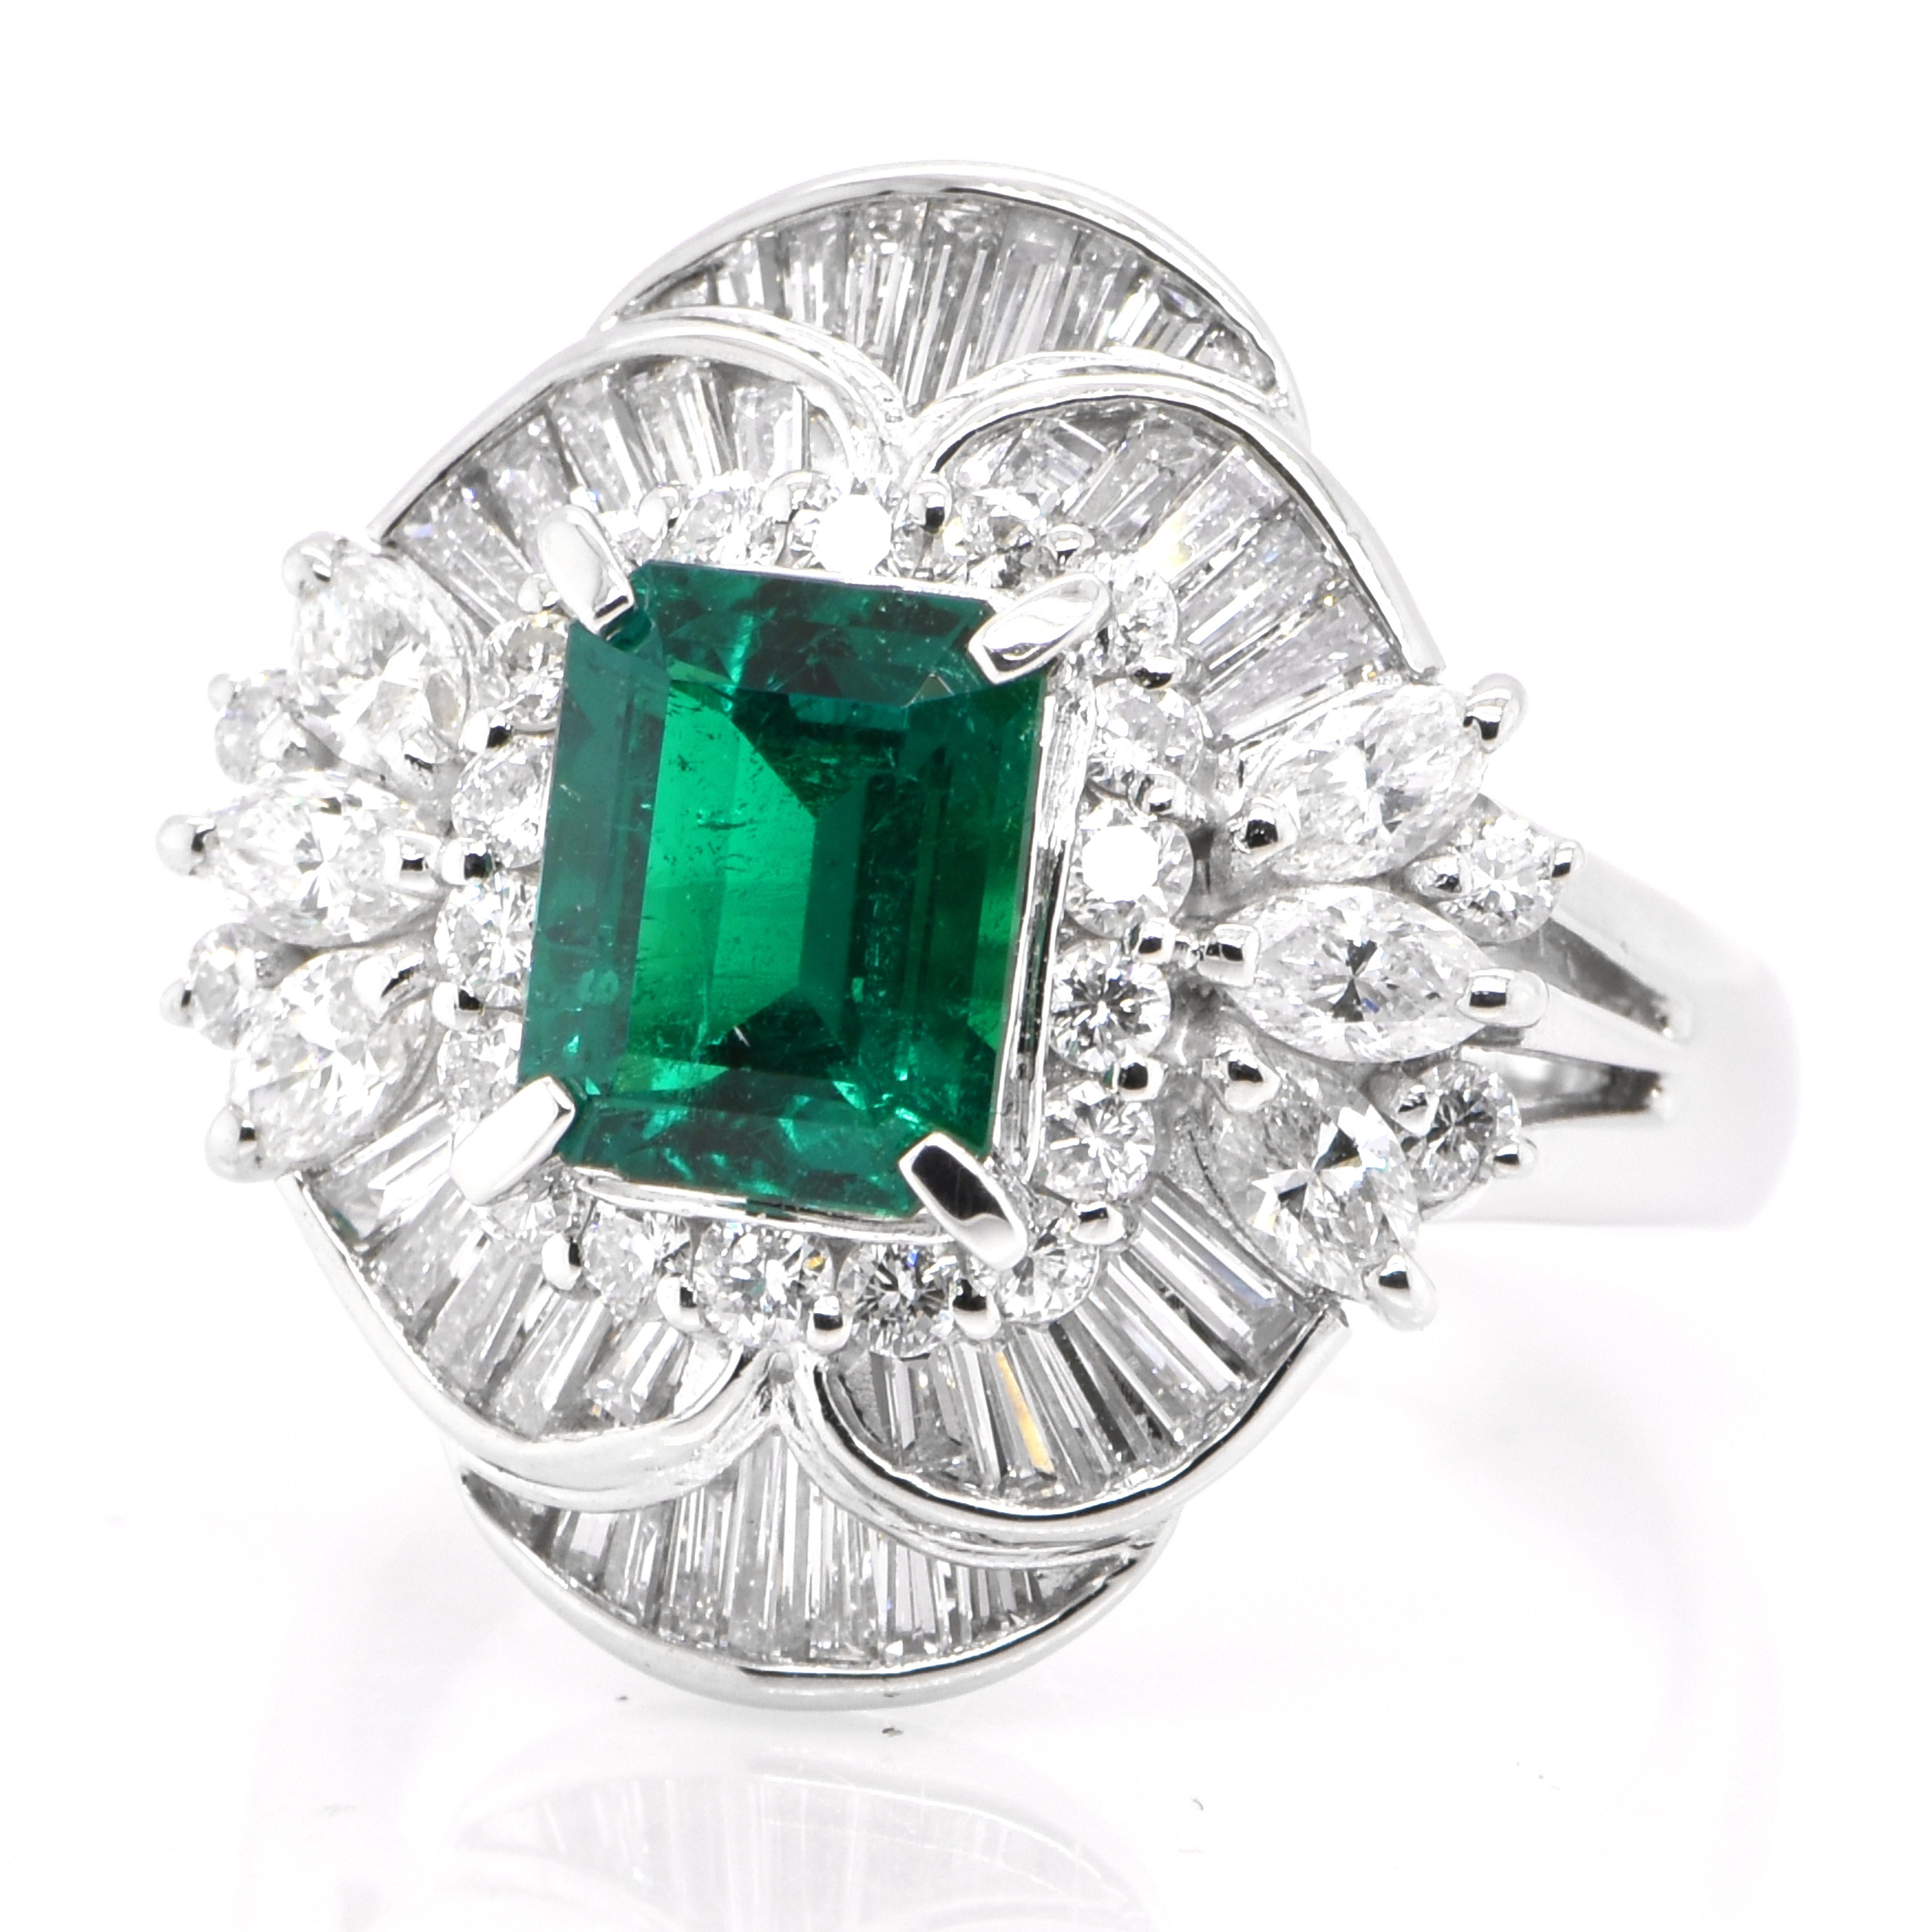 A stunning ring featuring a GRS Certified 1.24 Carat Natural Colombian, Insignificantly treated, Mizo-Green Emerald and 1.40 Carats of Diamond Accents set in Platinum. People have admired emerald’s green for thousands of years. Emeralds have always